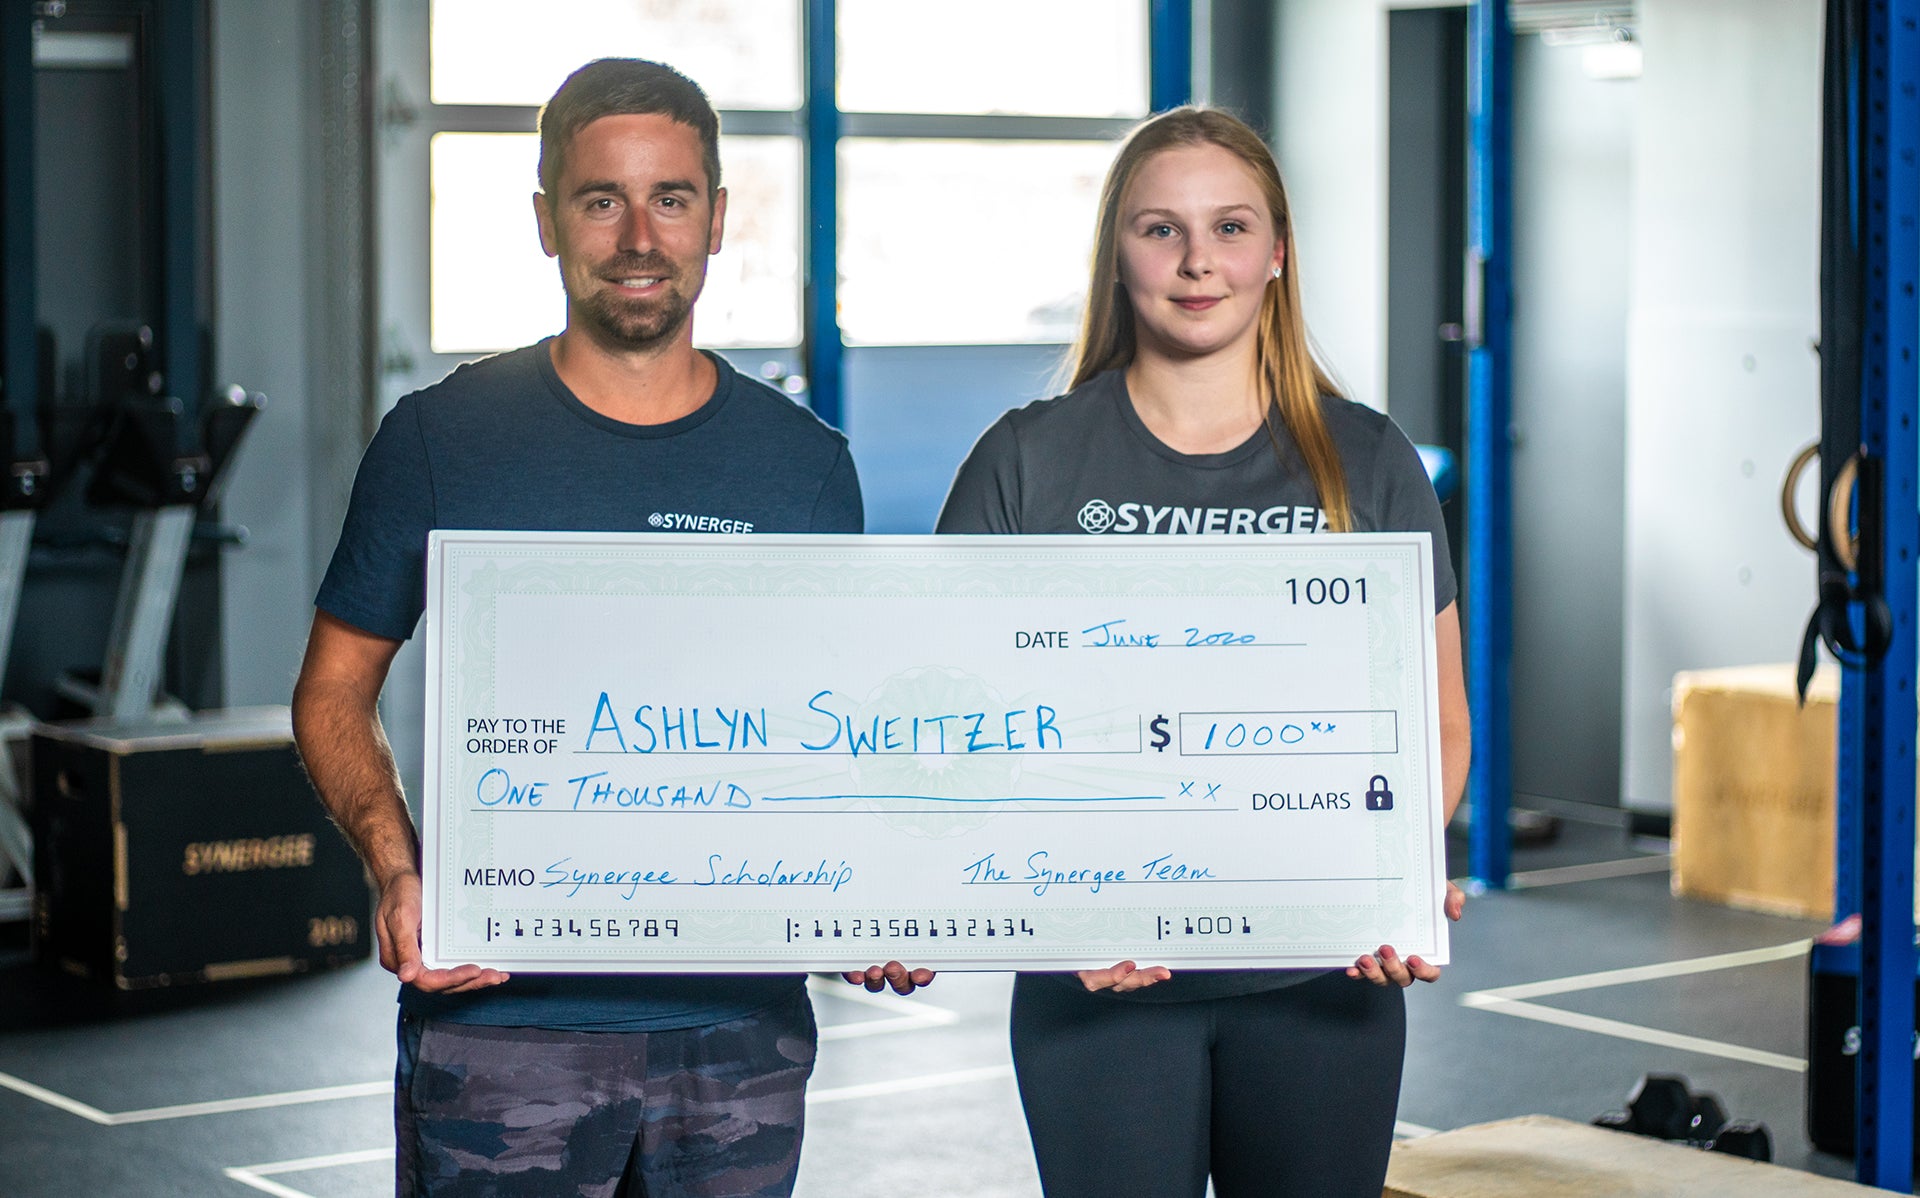 We Will Give (One Of) You $1000 For Sharing Your Personal Fitness Story